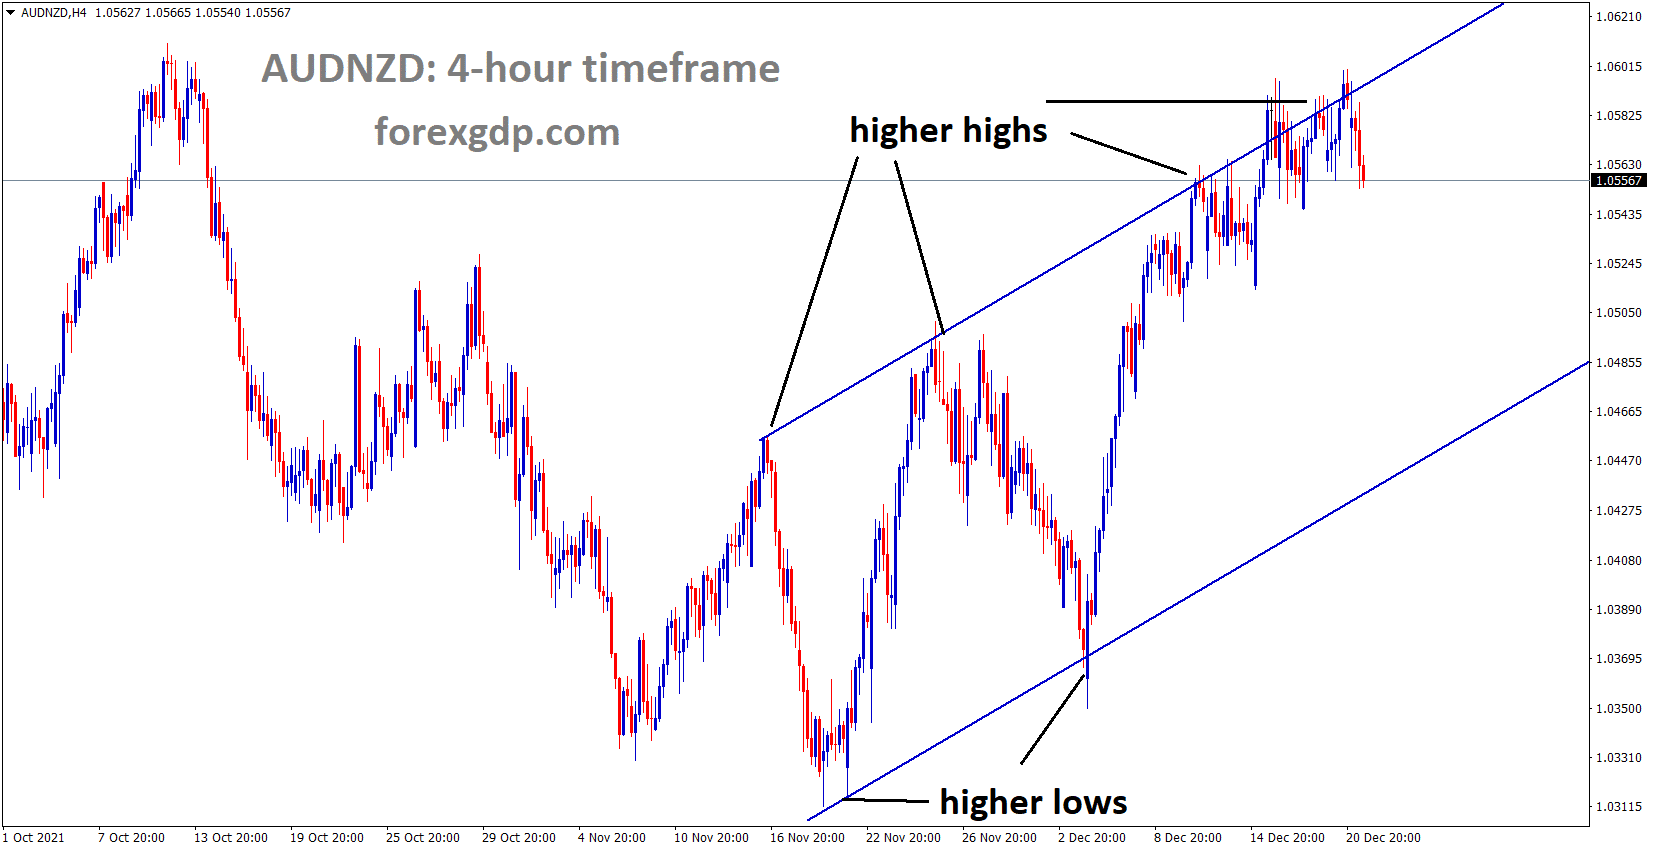 AUDNZD is moving in an ascending channel and the market fell from the higher high area of the channel